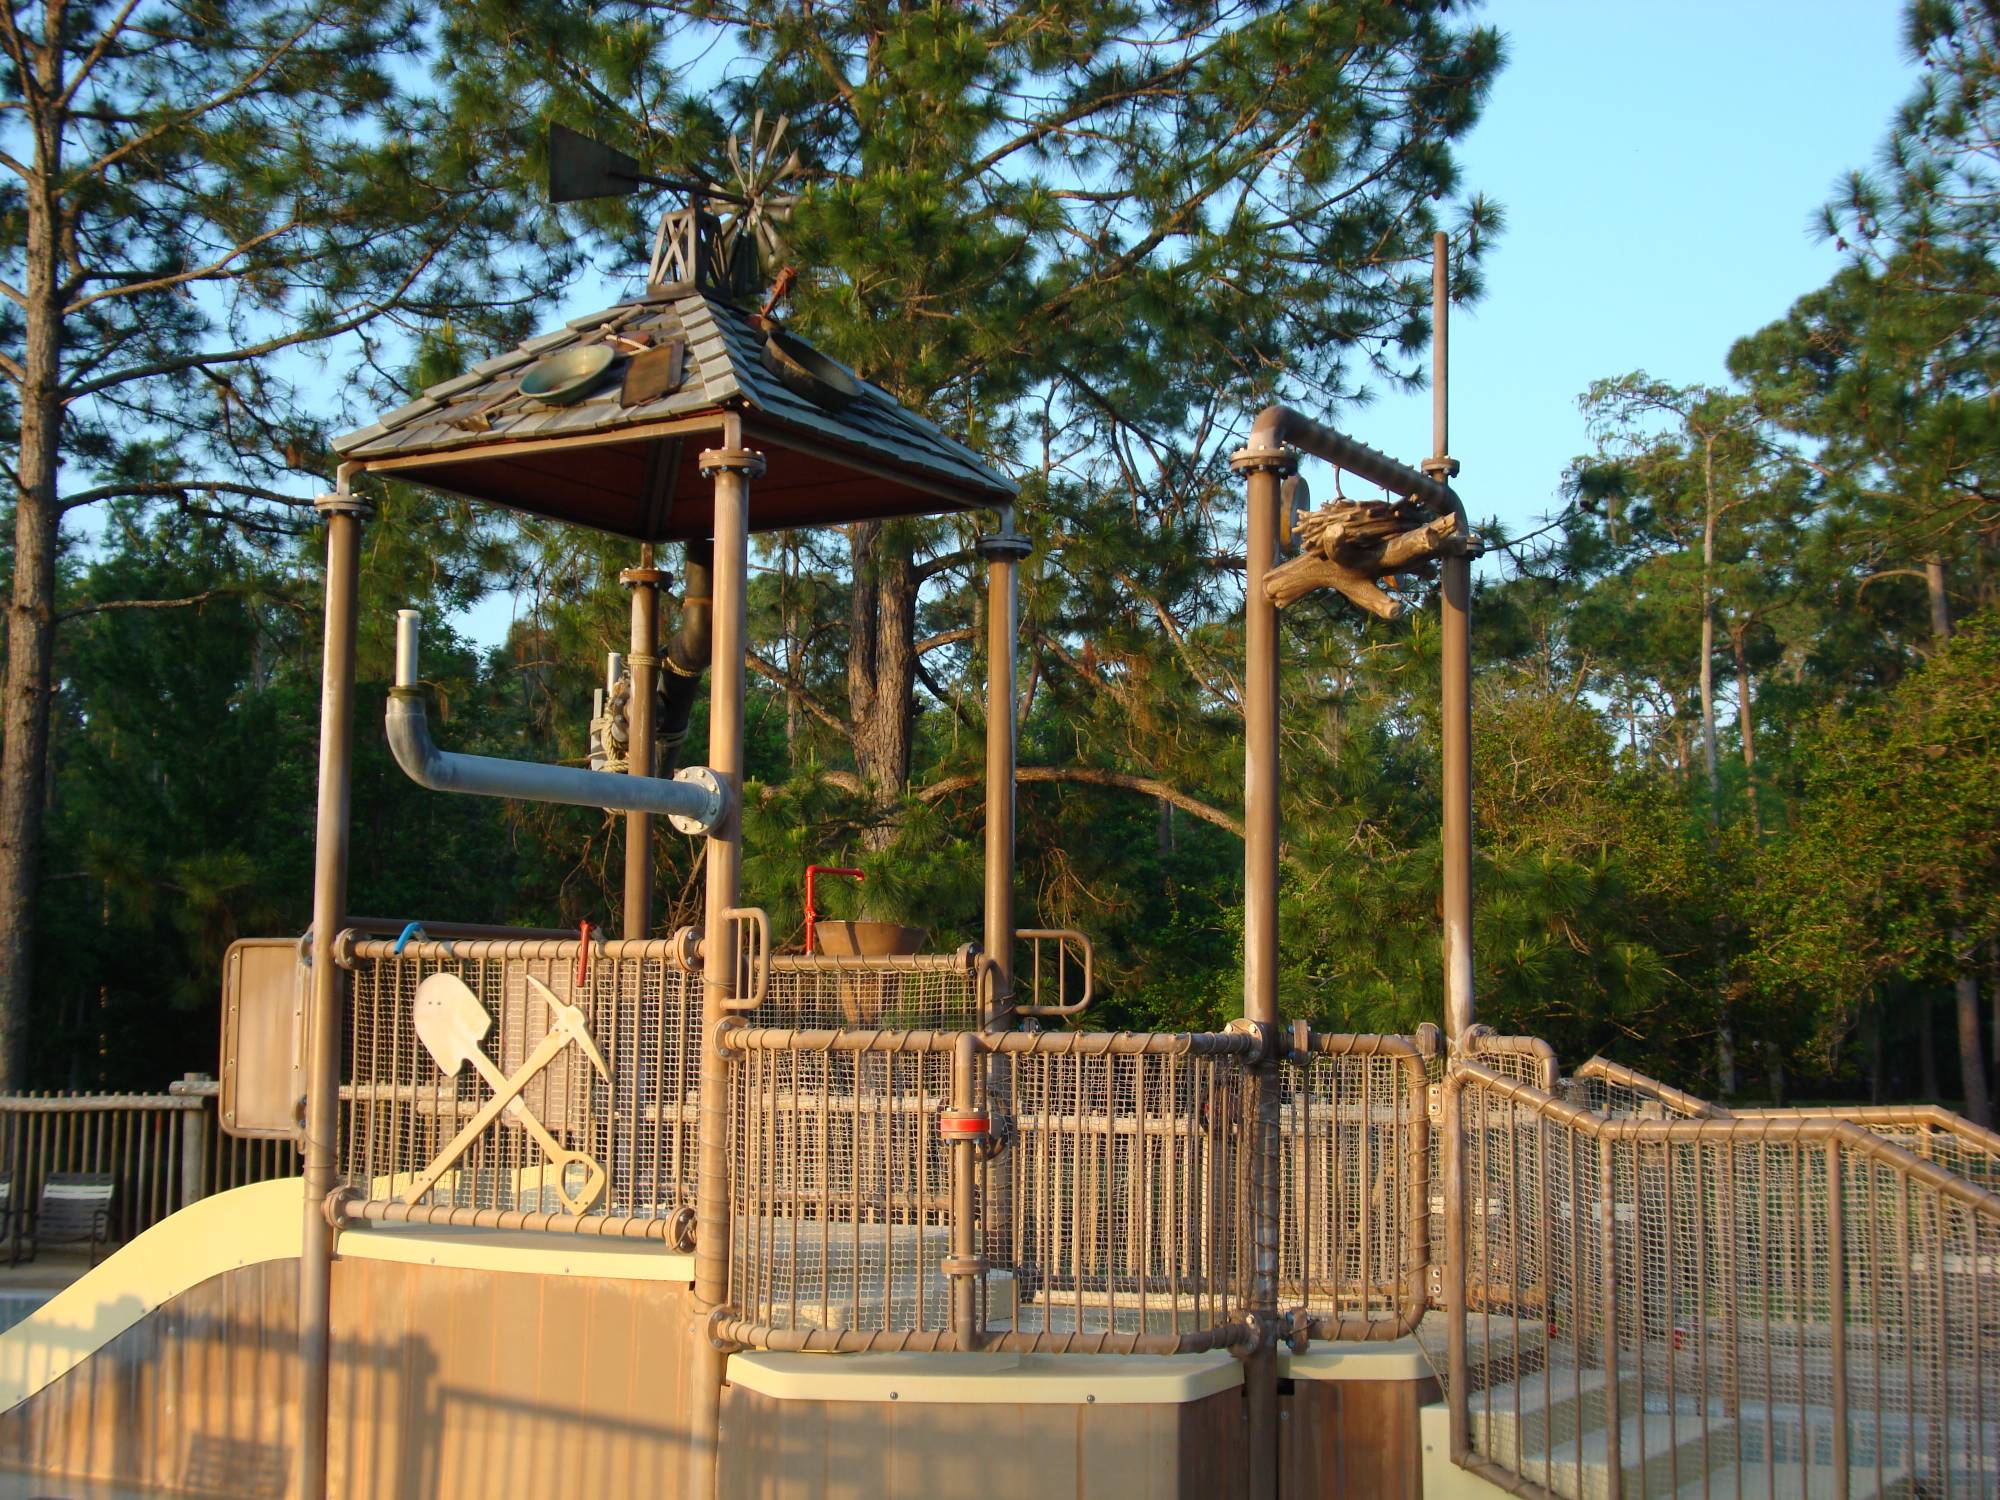 Fort Wilderness - water play area